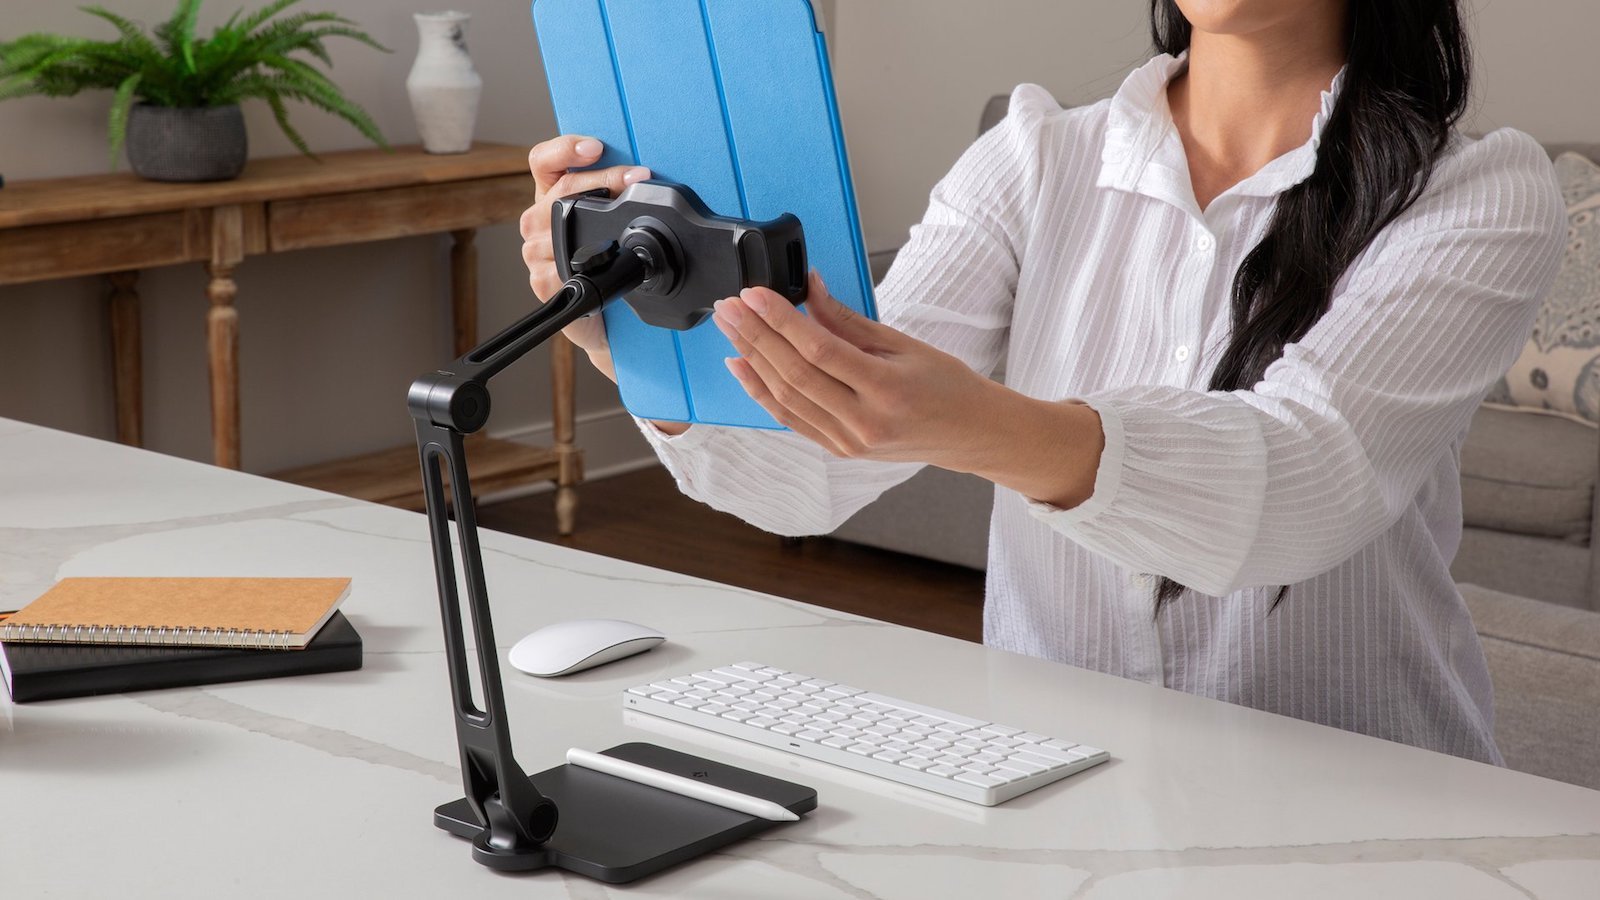 Twelve South HoverBar Duo adjustable iPad stand lets you view your screen hands-free